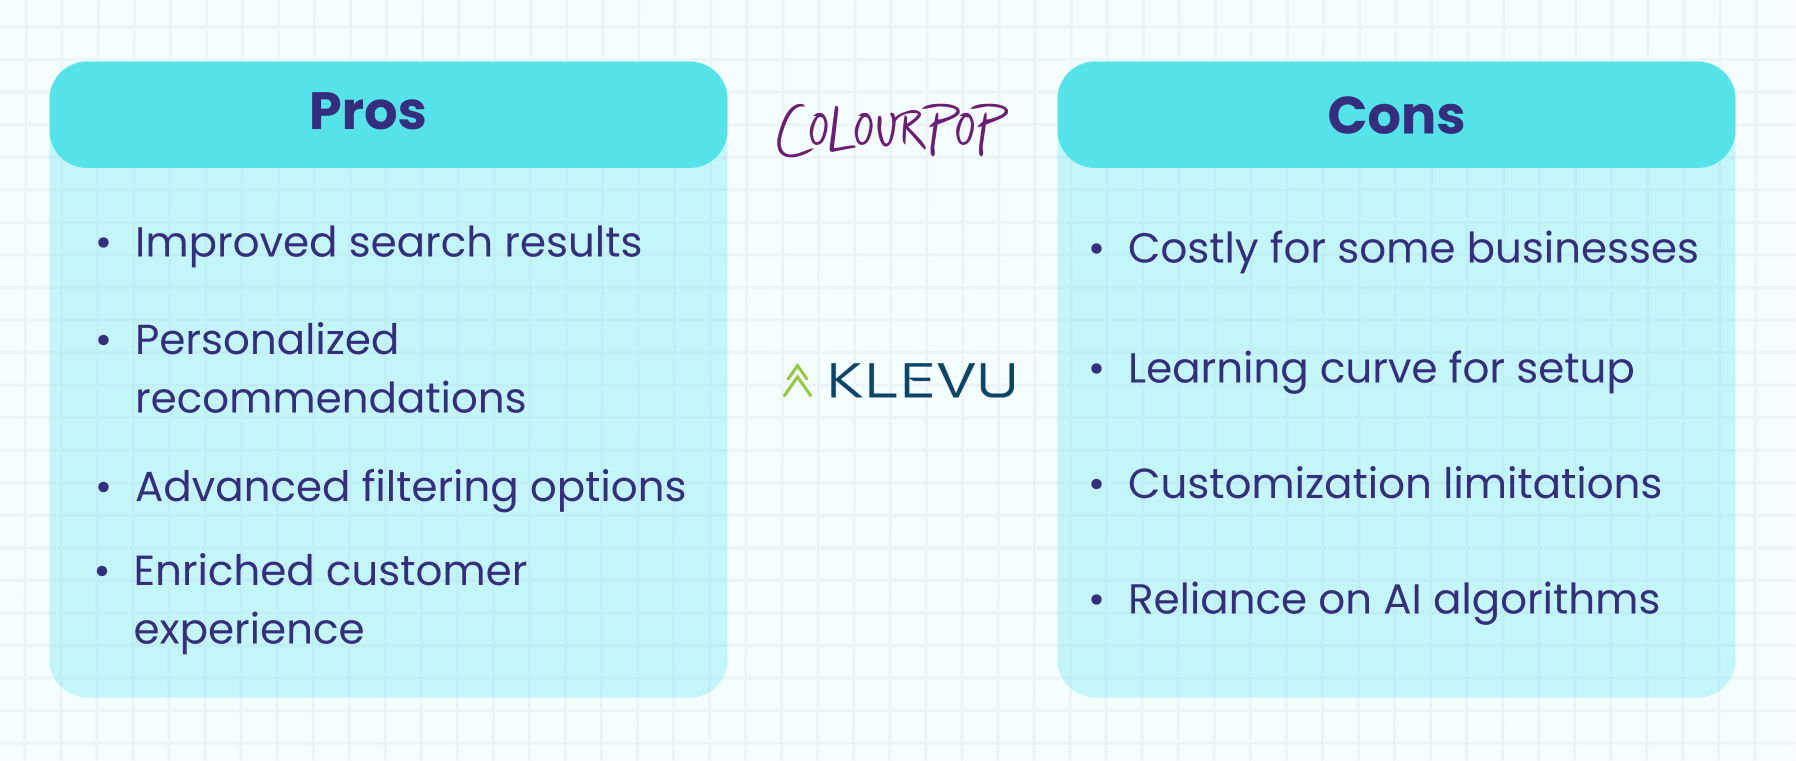 Pros and cons of Klevu